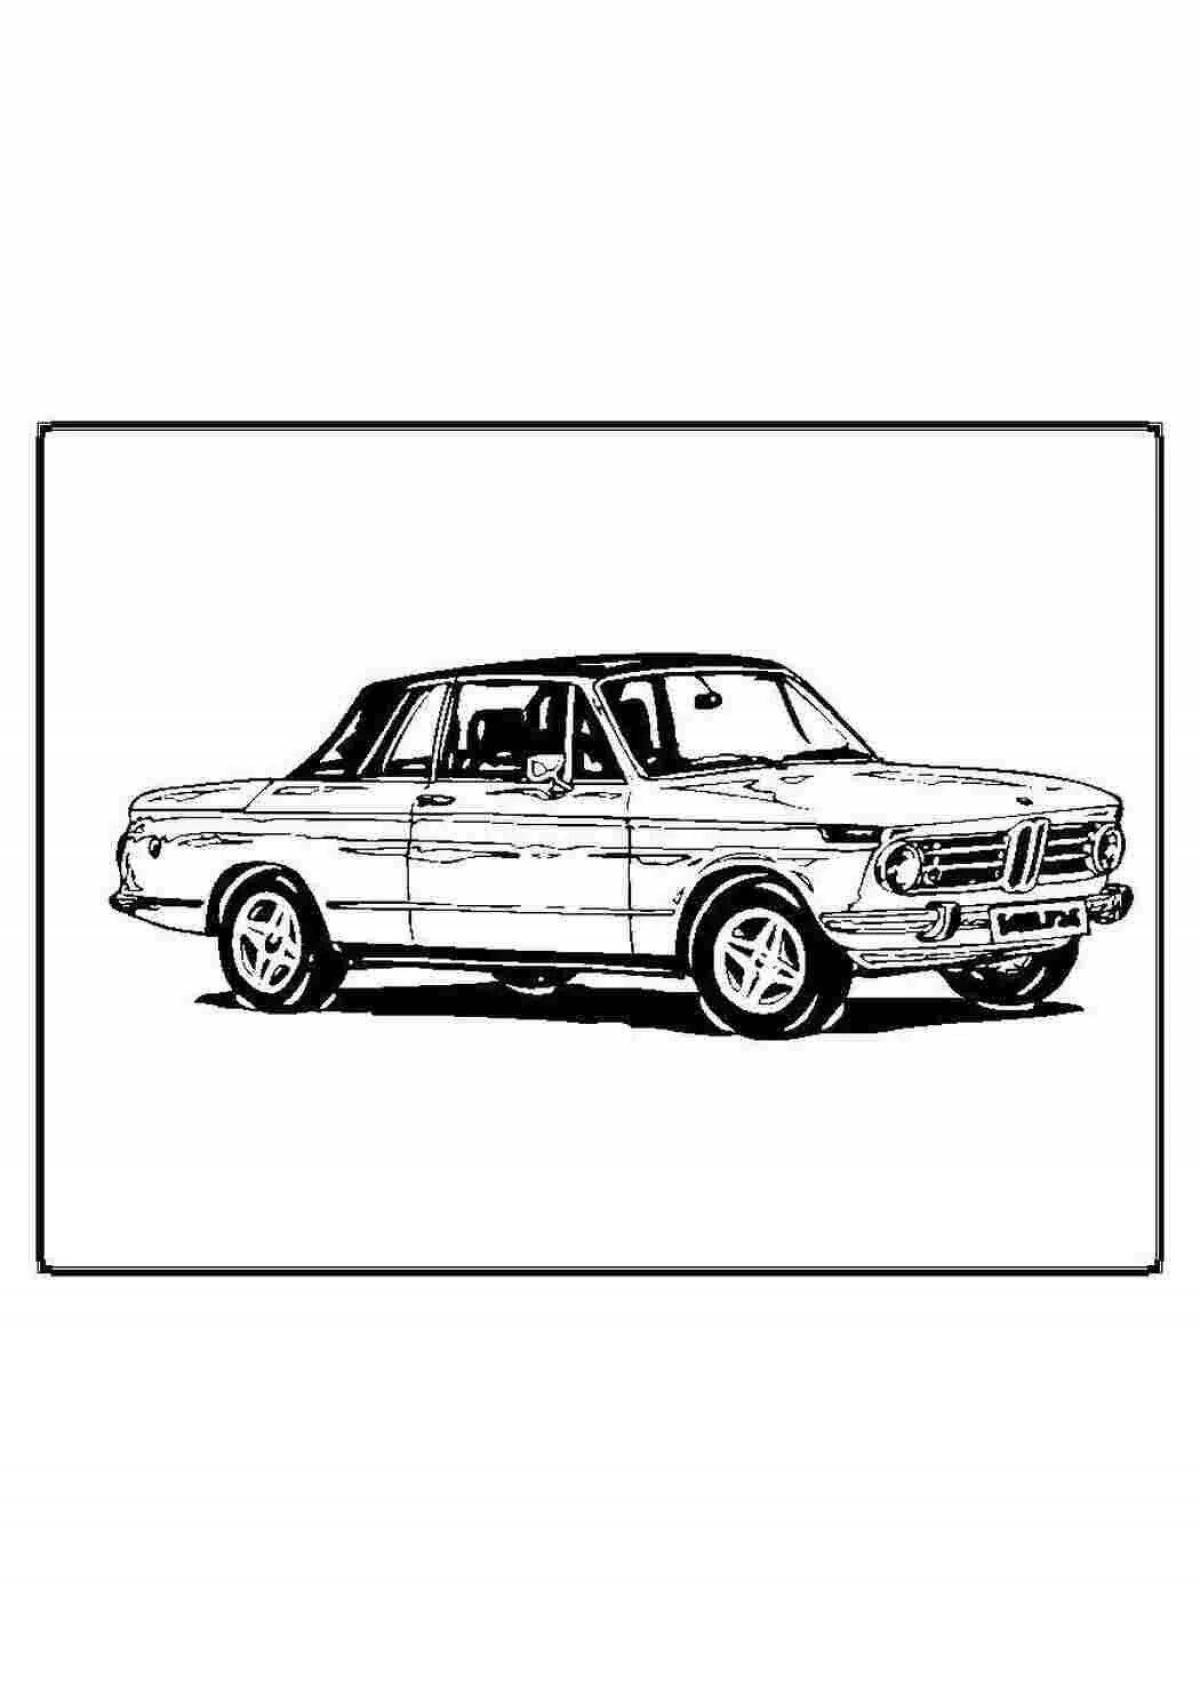 Coloring page amazing soviet cars